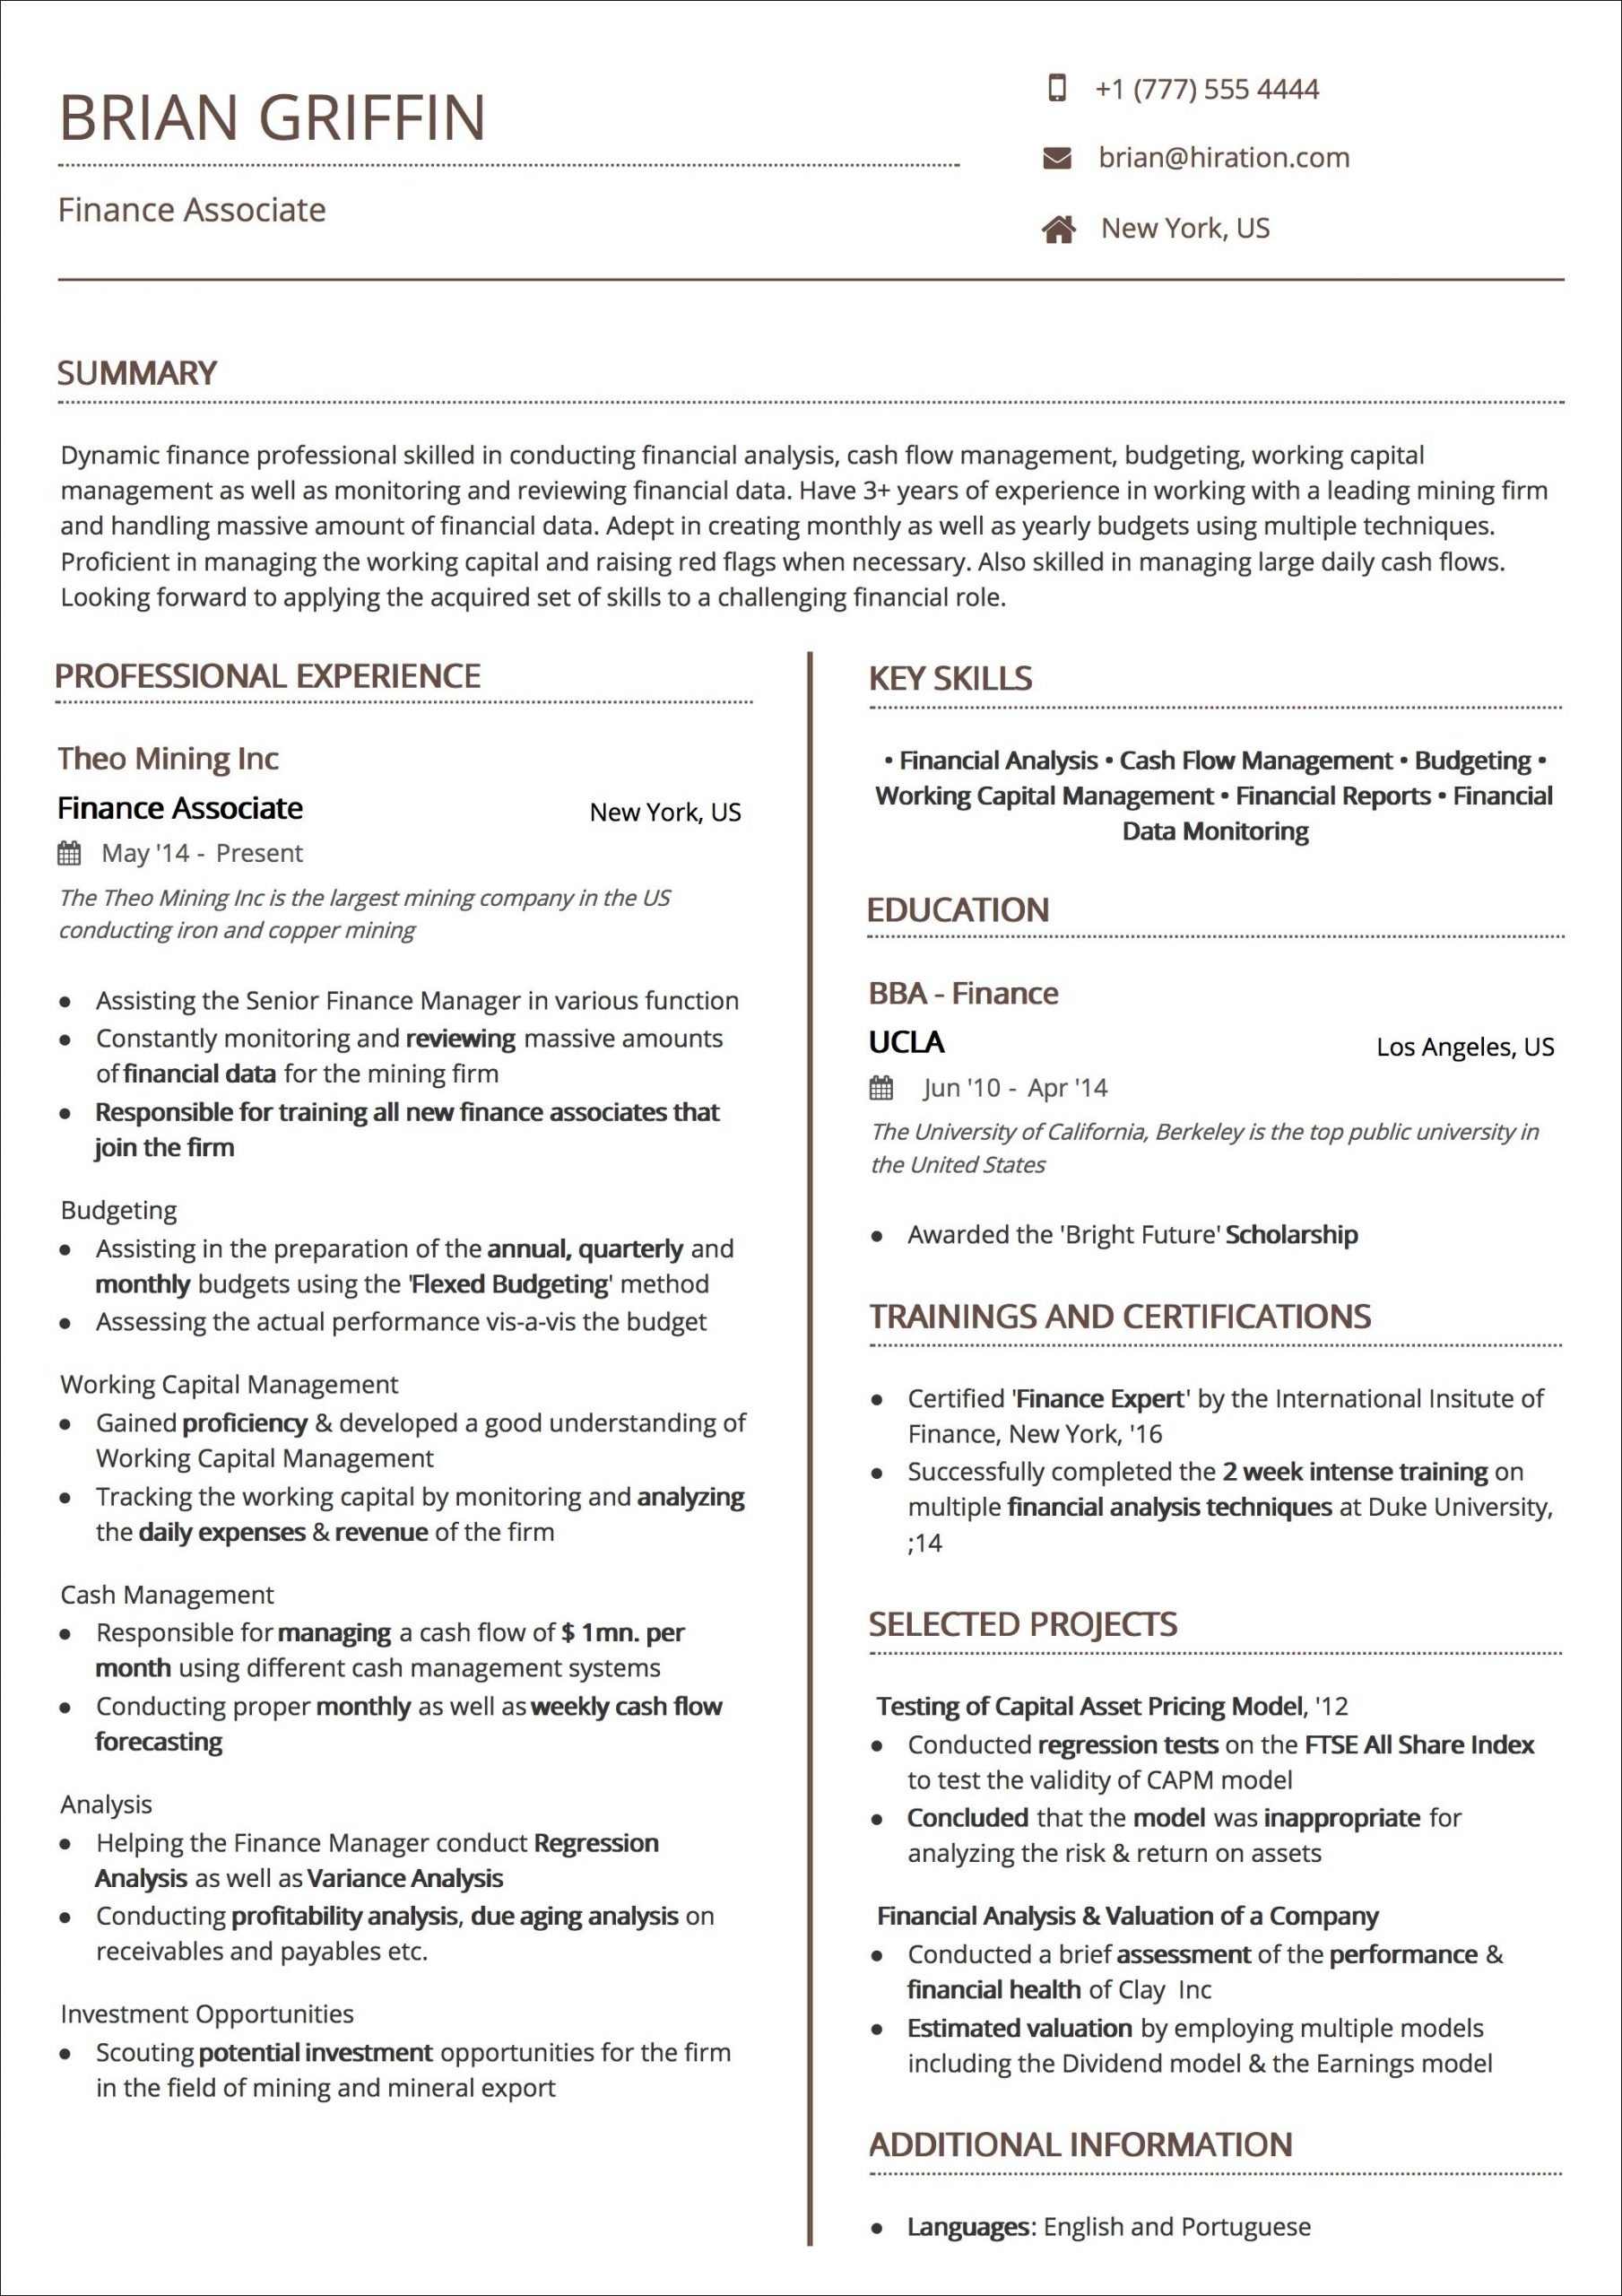 Resume Templates The 2020 Guide To Choosing The Best inside dimensions 2067 X 2925